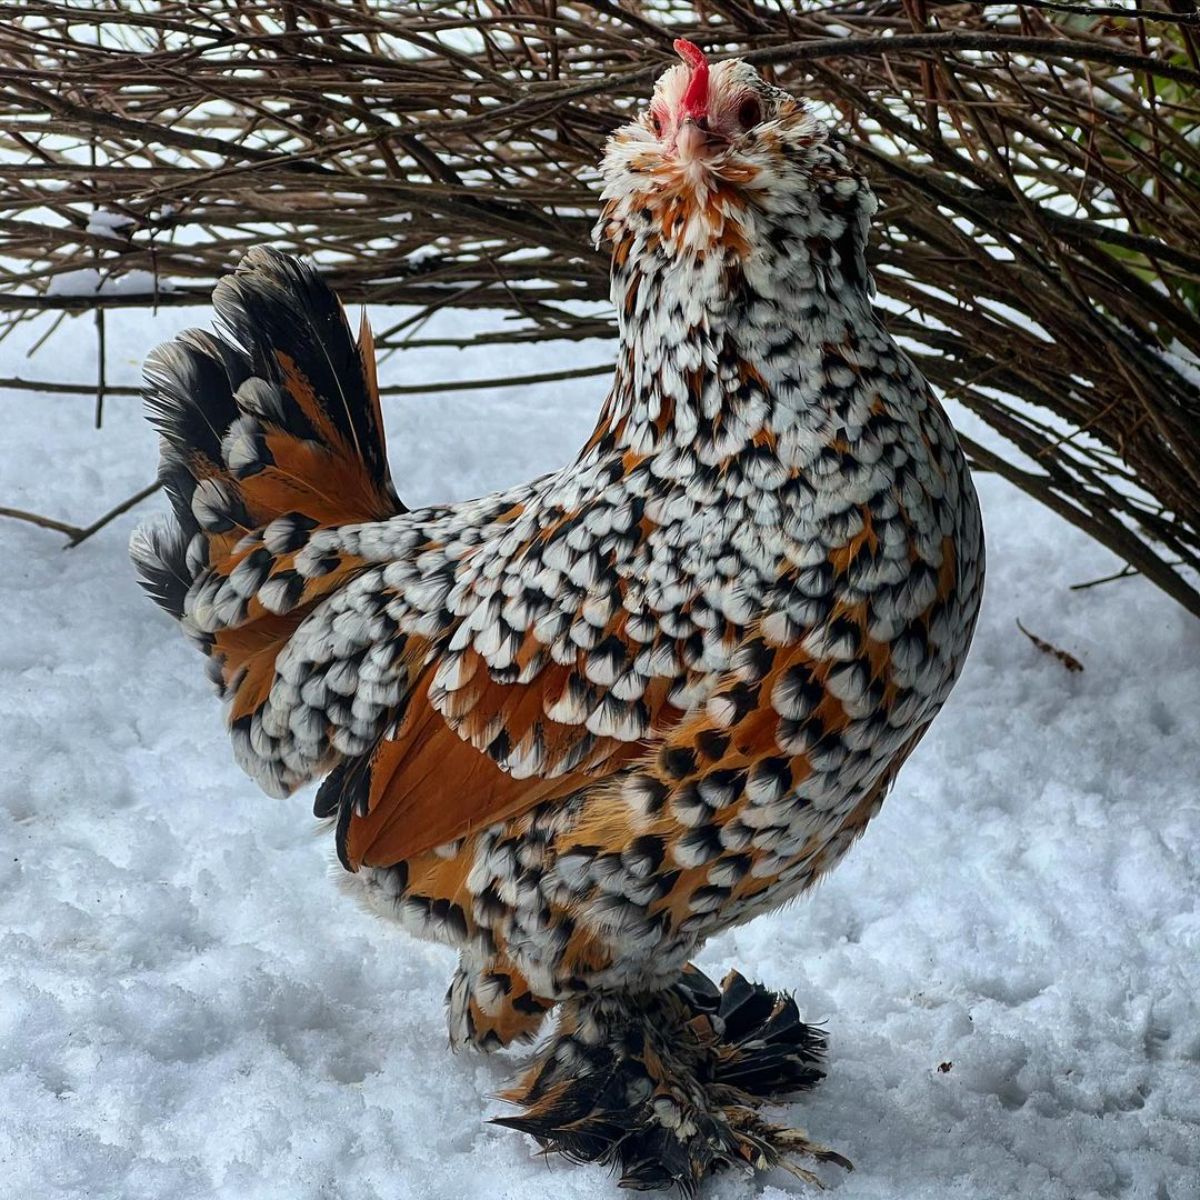 An adorable speckled Belgian Bearded d’Uccle hen standing on snow.